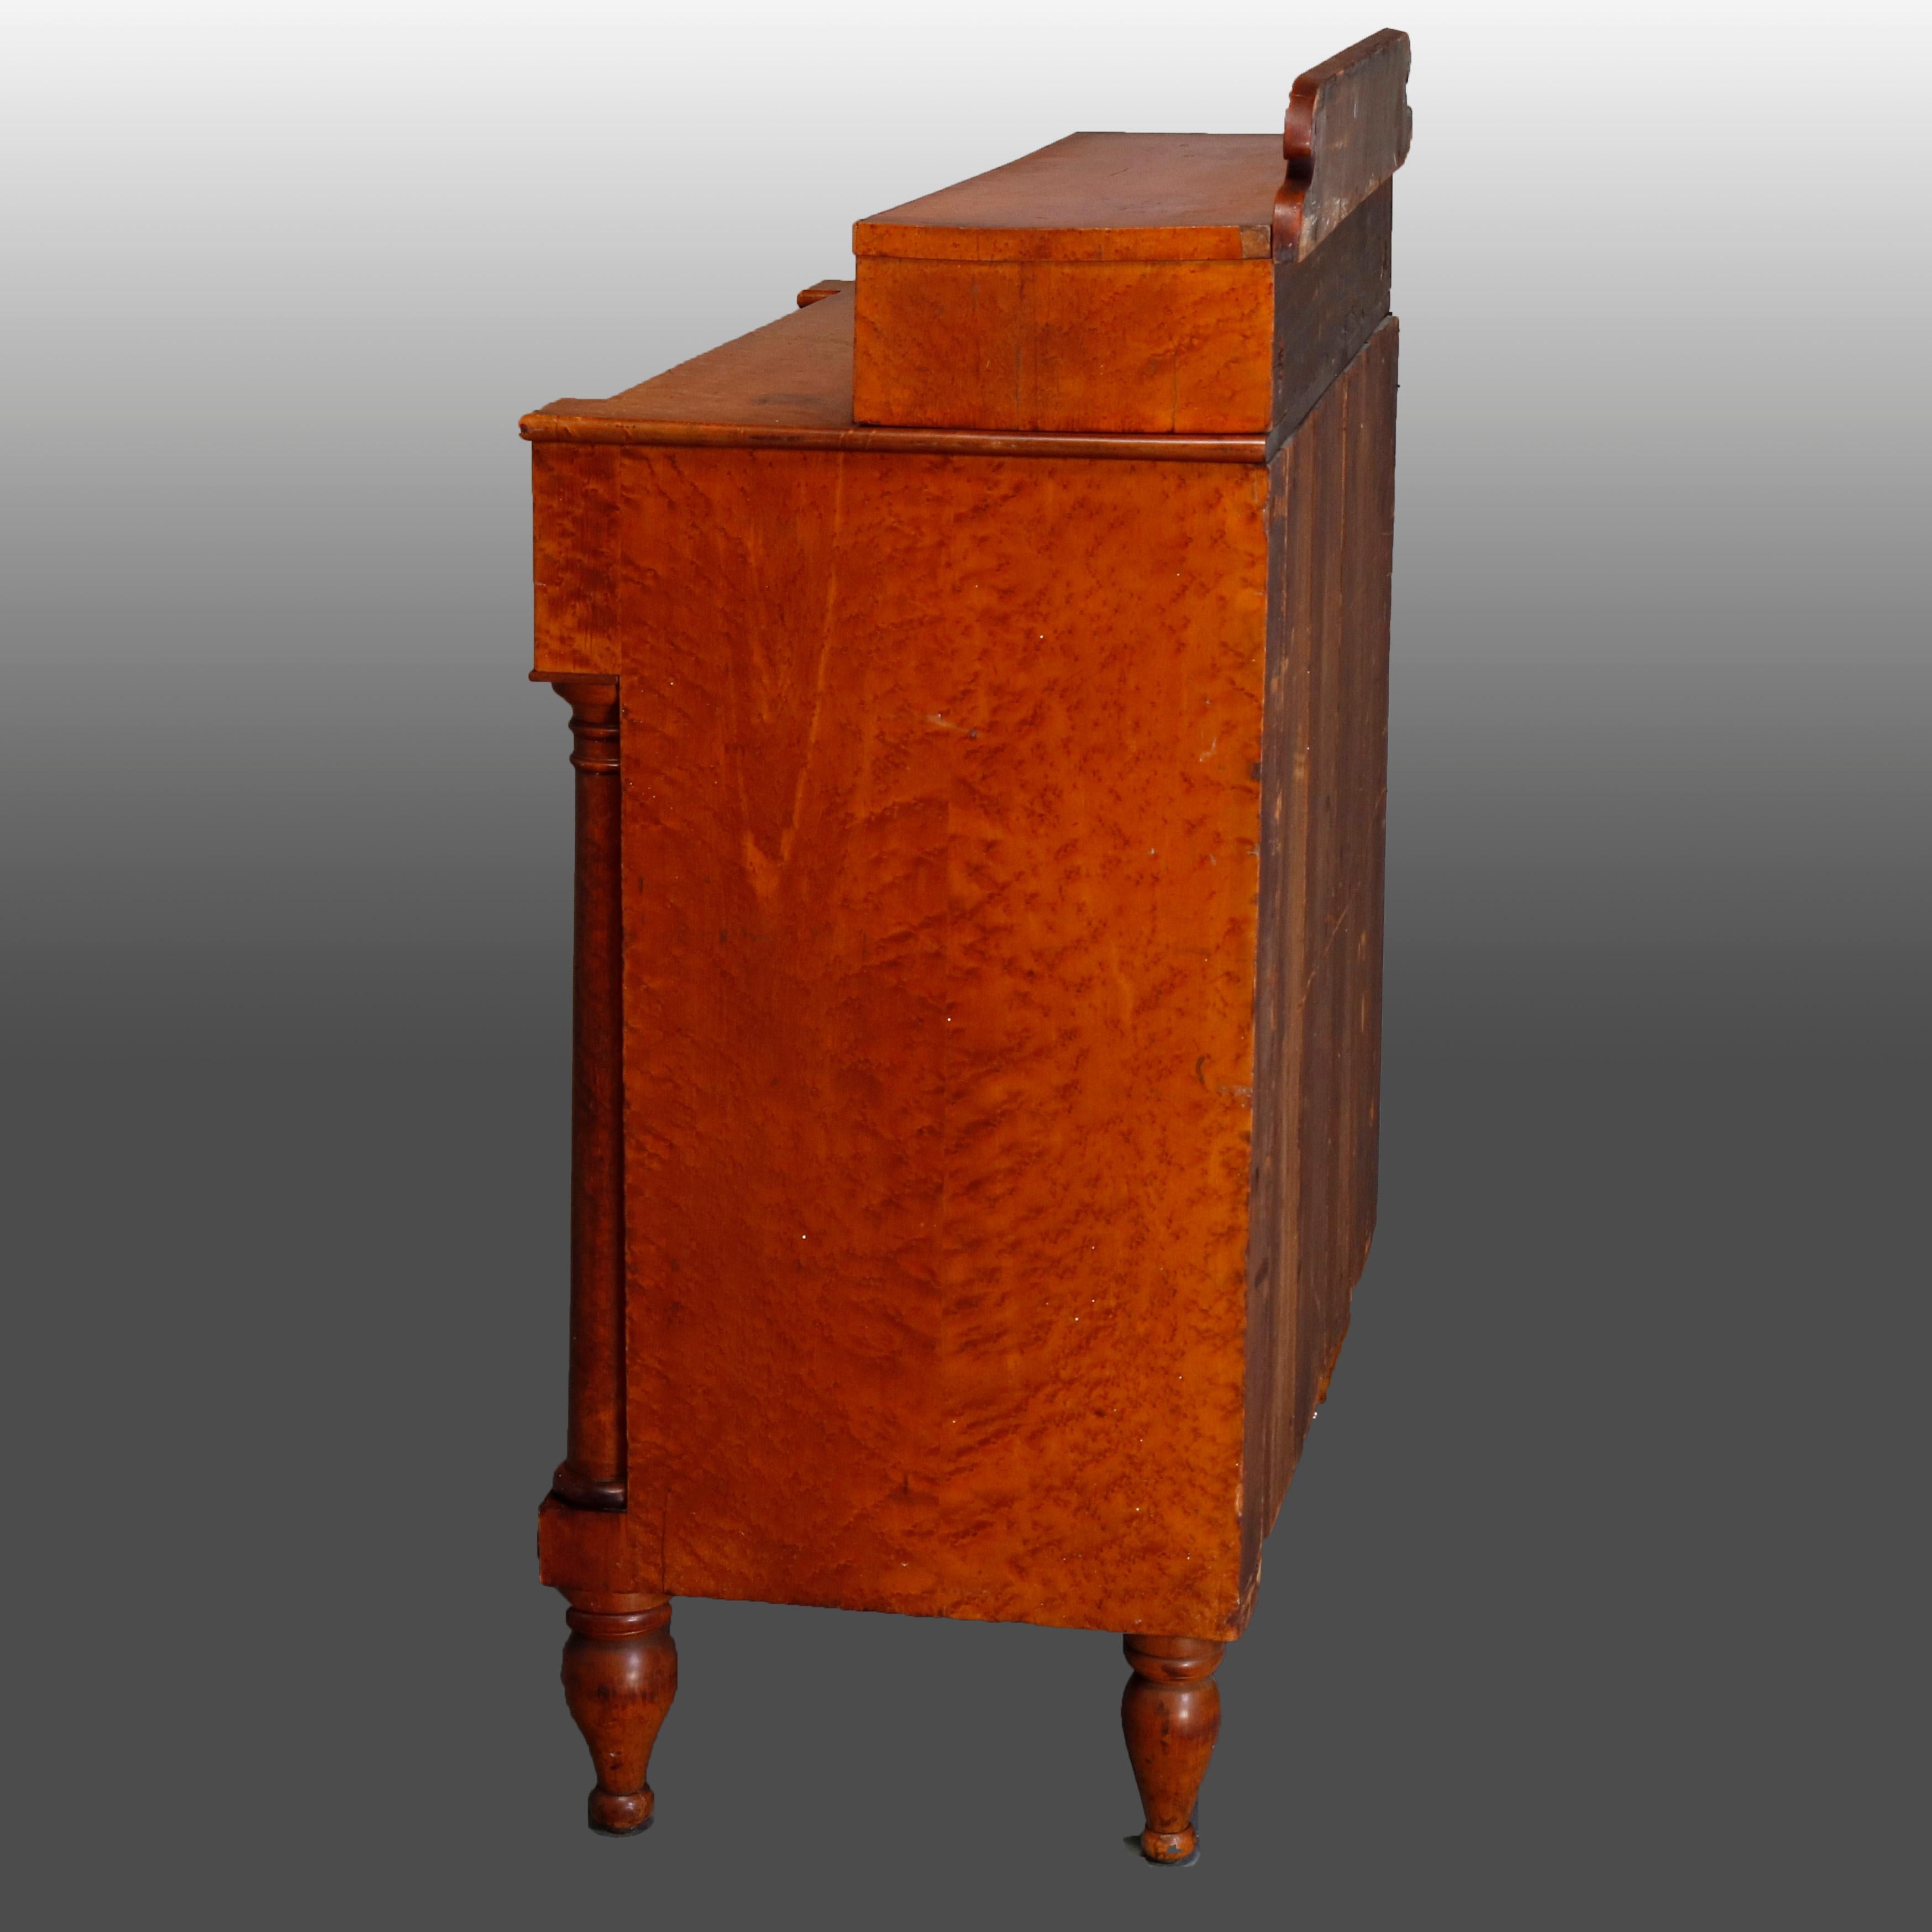 American Empire Antique Transitional Empire to Sheraton Birdseye Maple Chest of Drawers